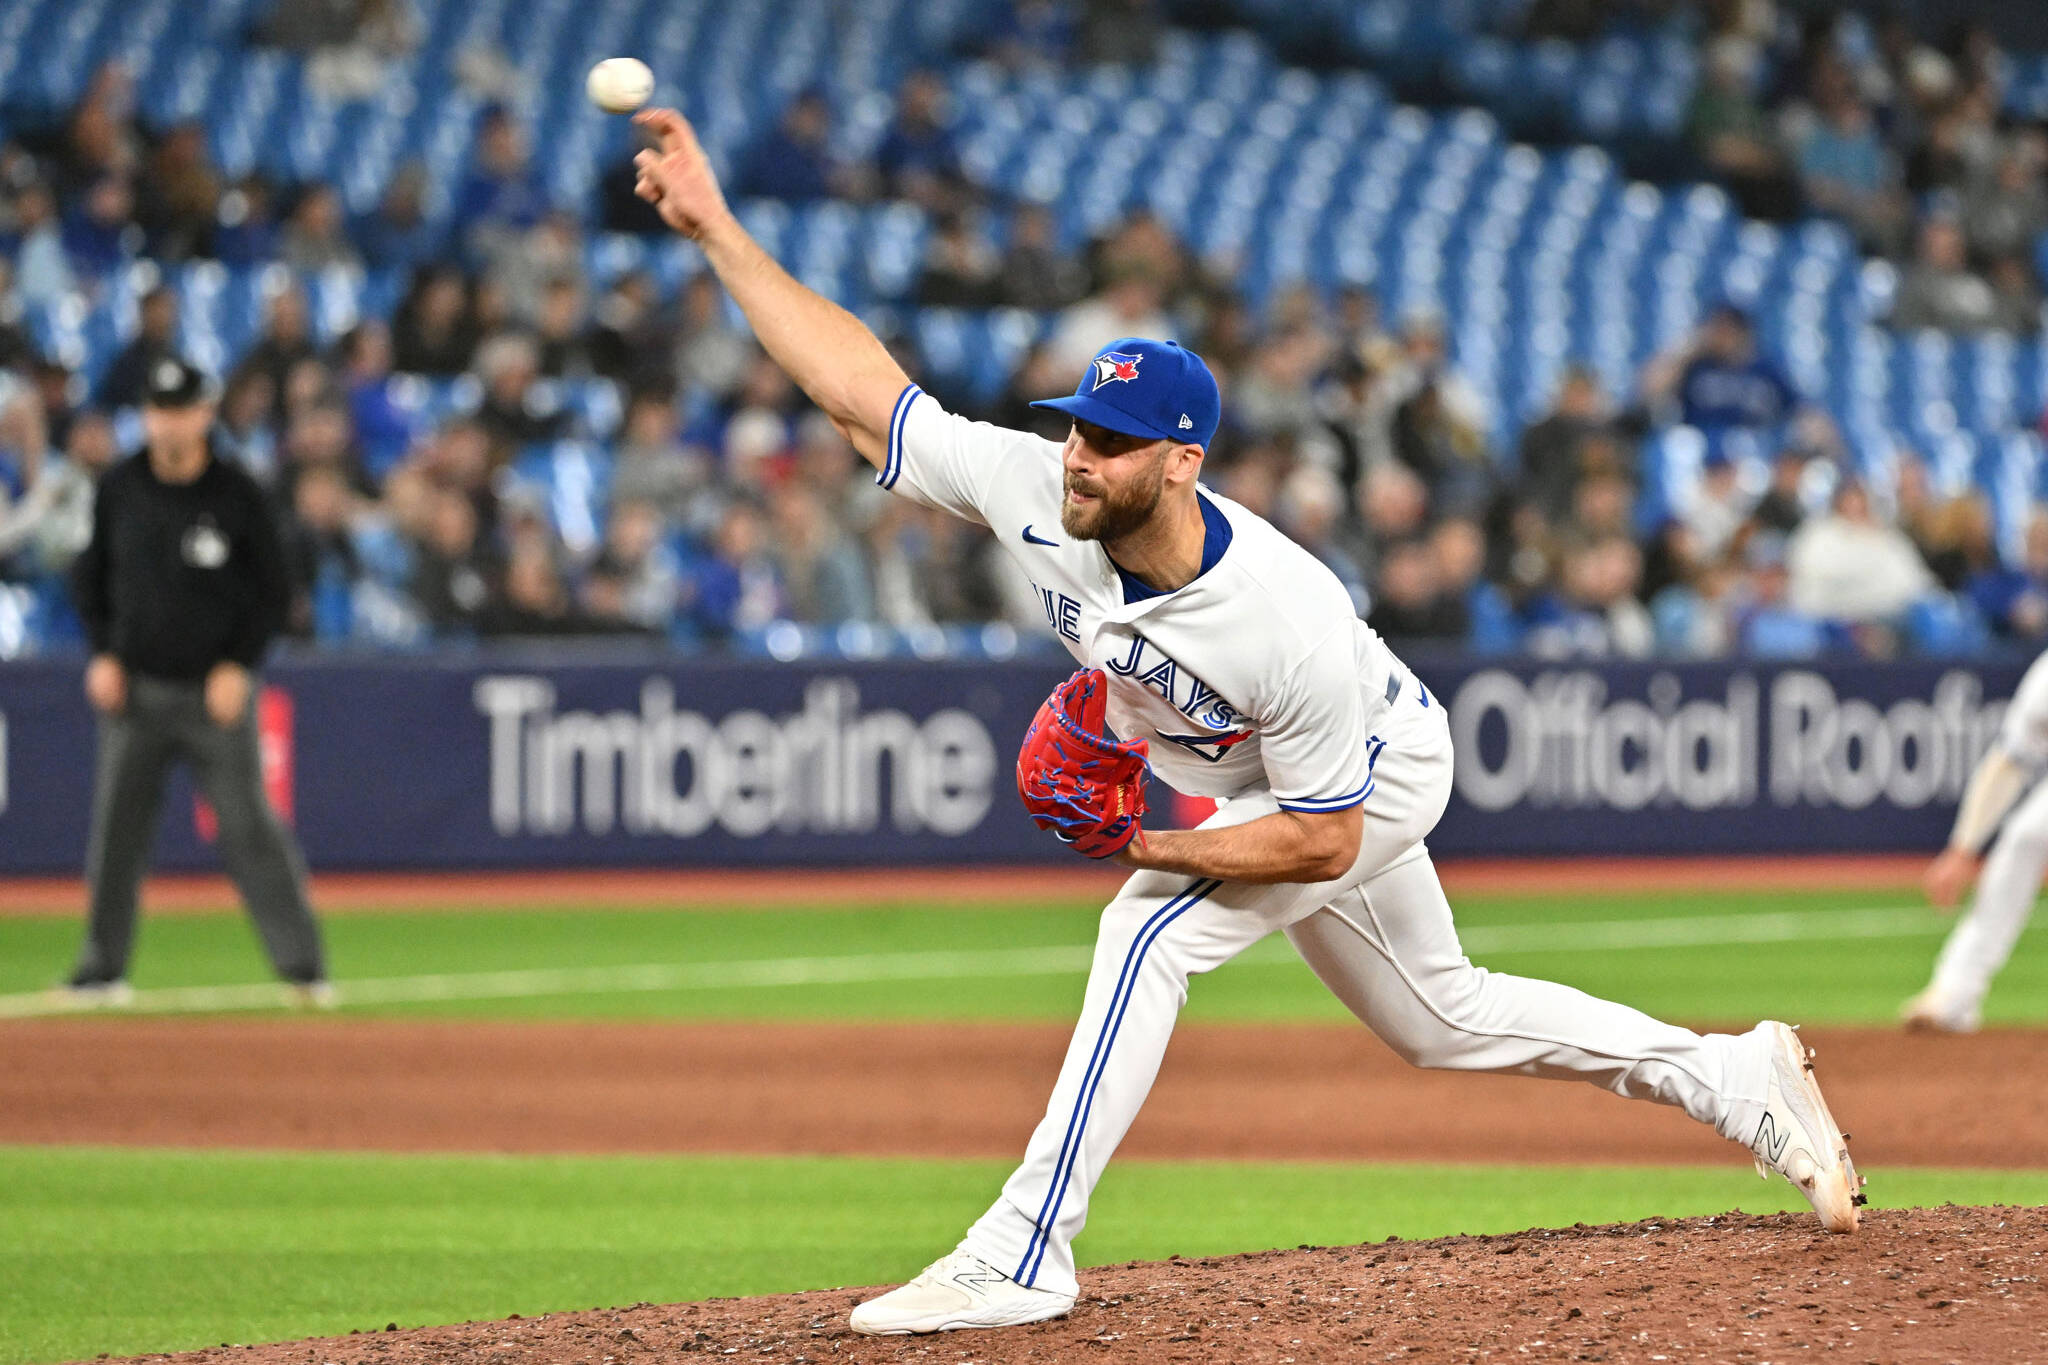 Blue Jays Fans Boo Their Pitcher After He Reposted Anti-LGBTQ+ Video